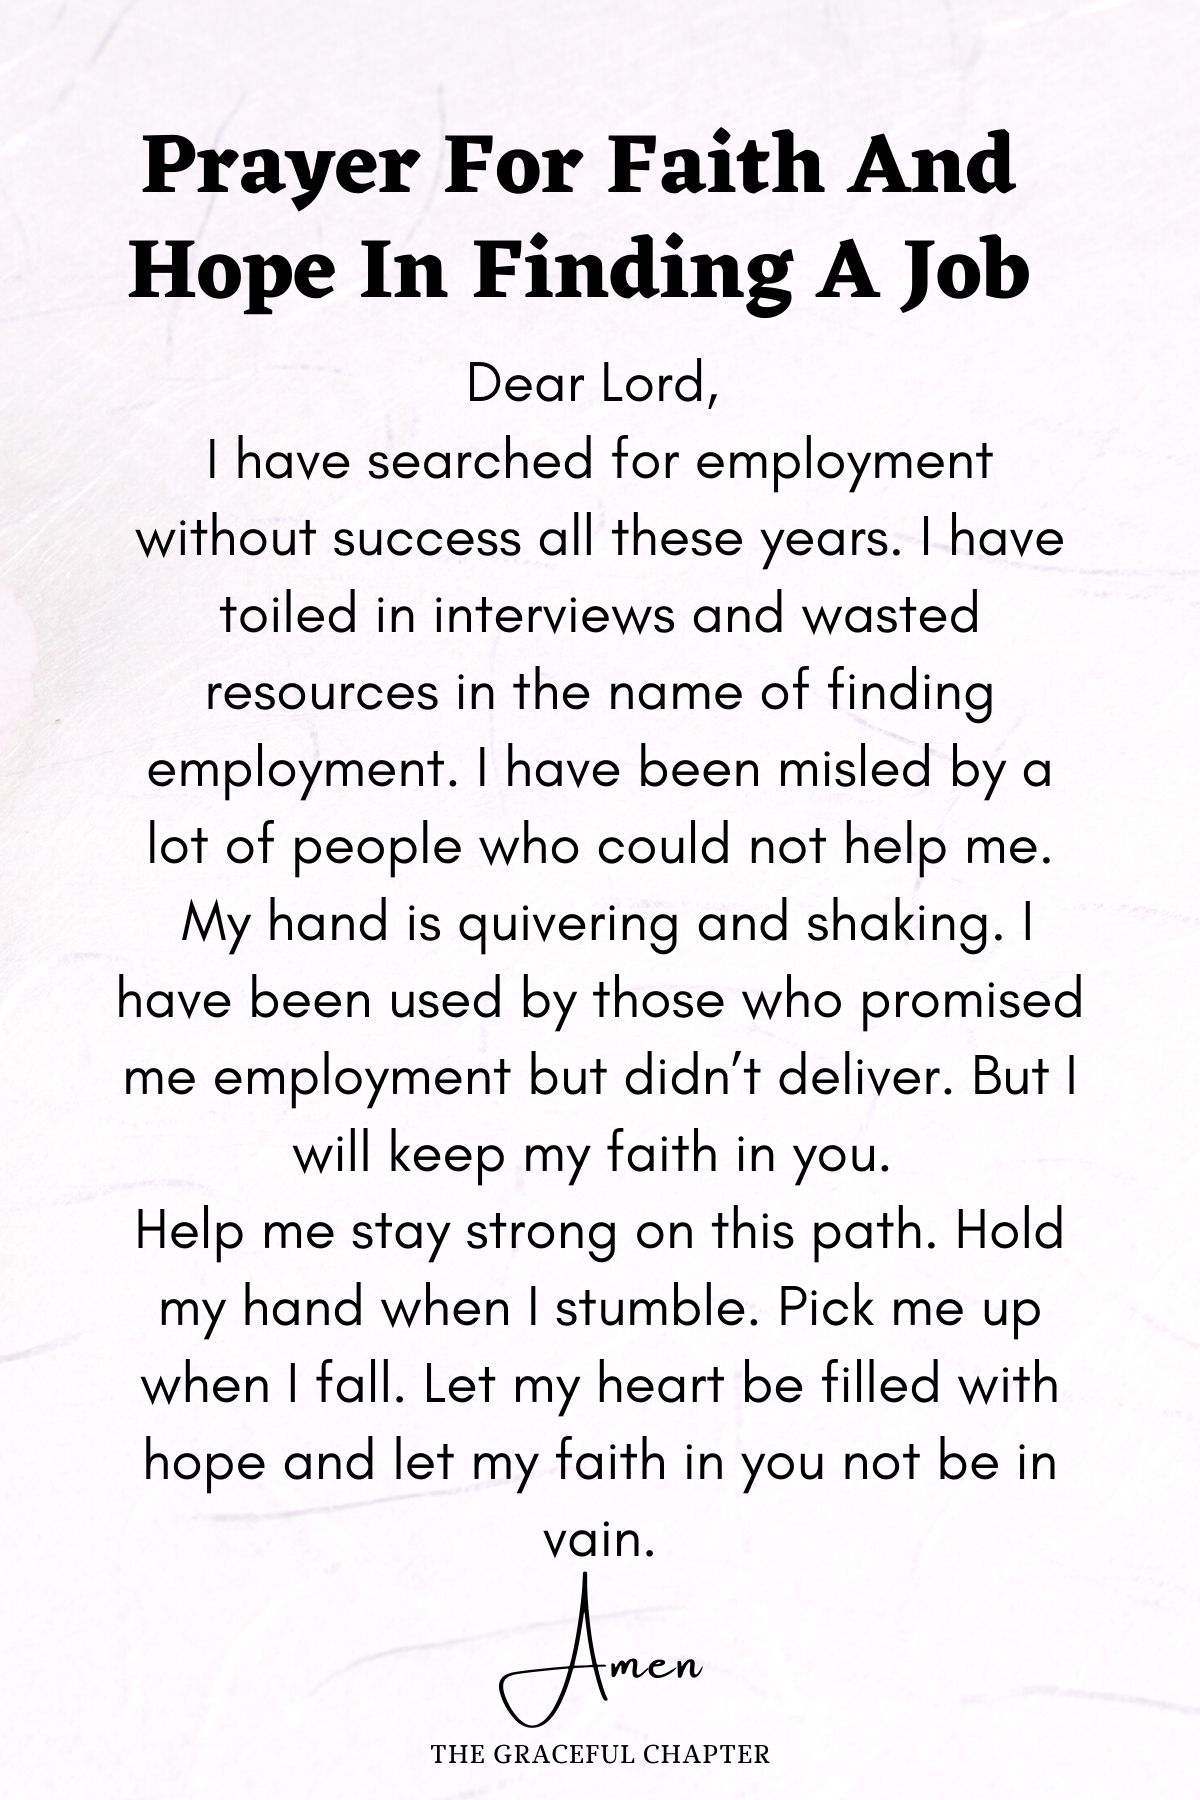 Prayer for faith and hope in finding a job